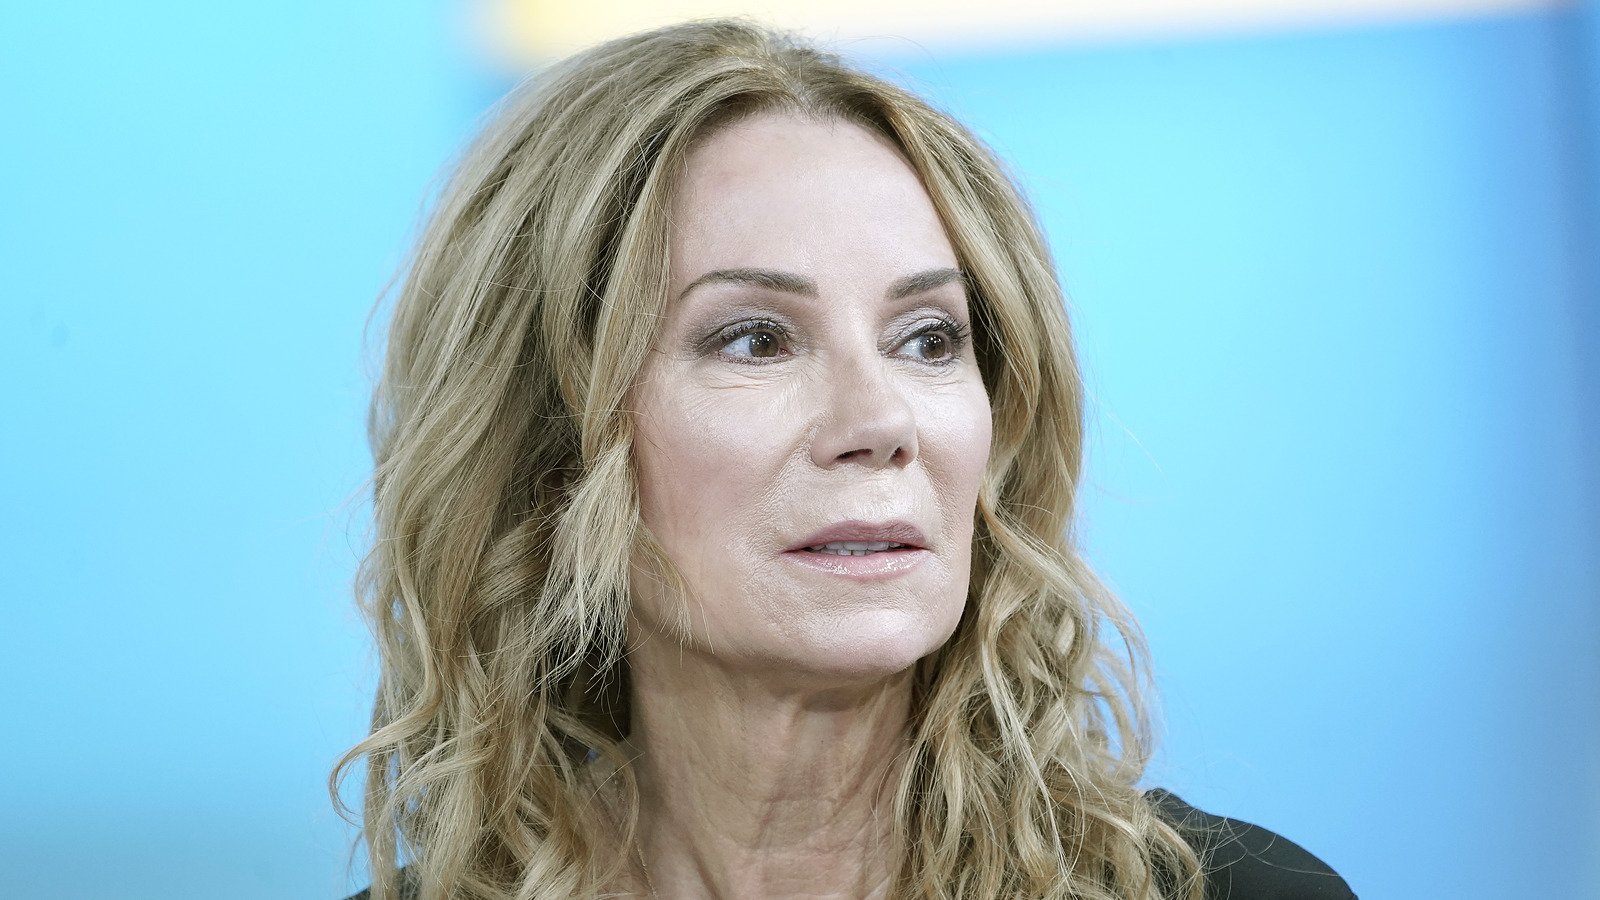 The Real Reason Kathie Lee Gifford Started Drinking On-Air